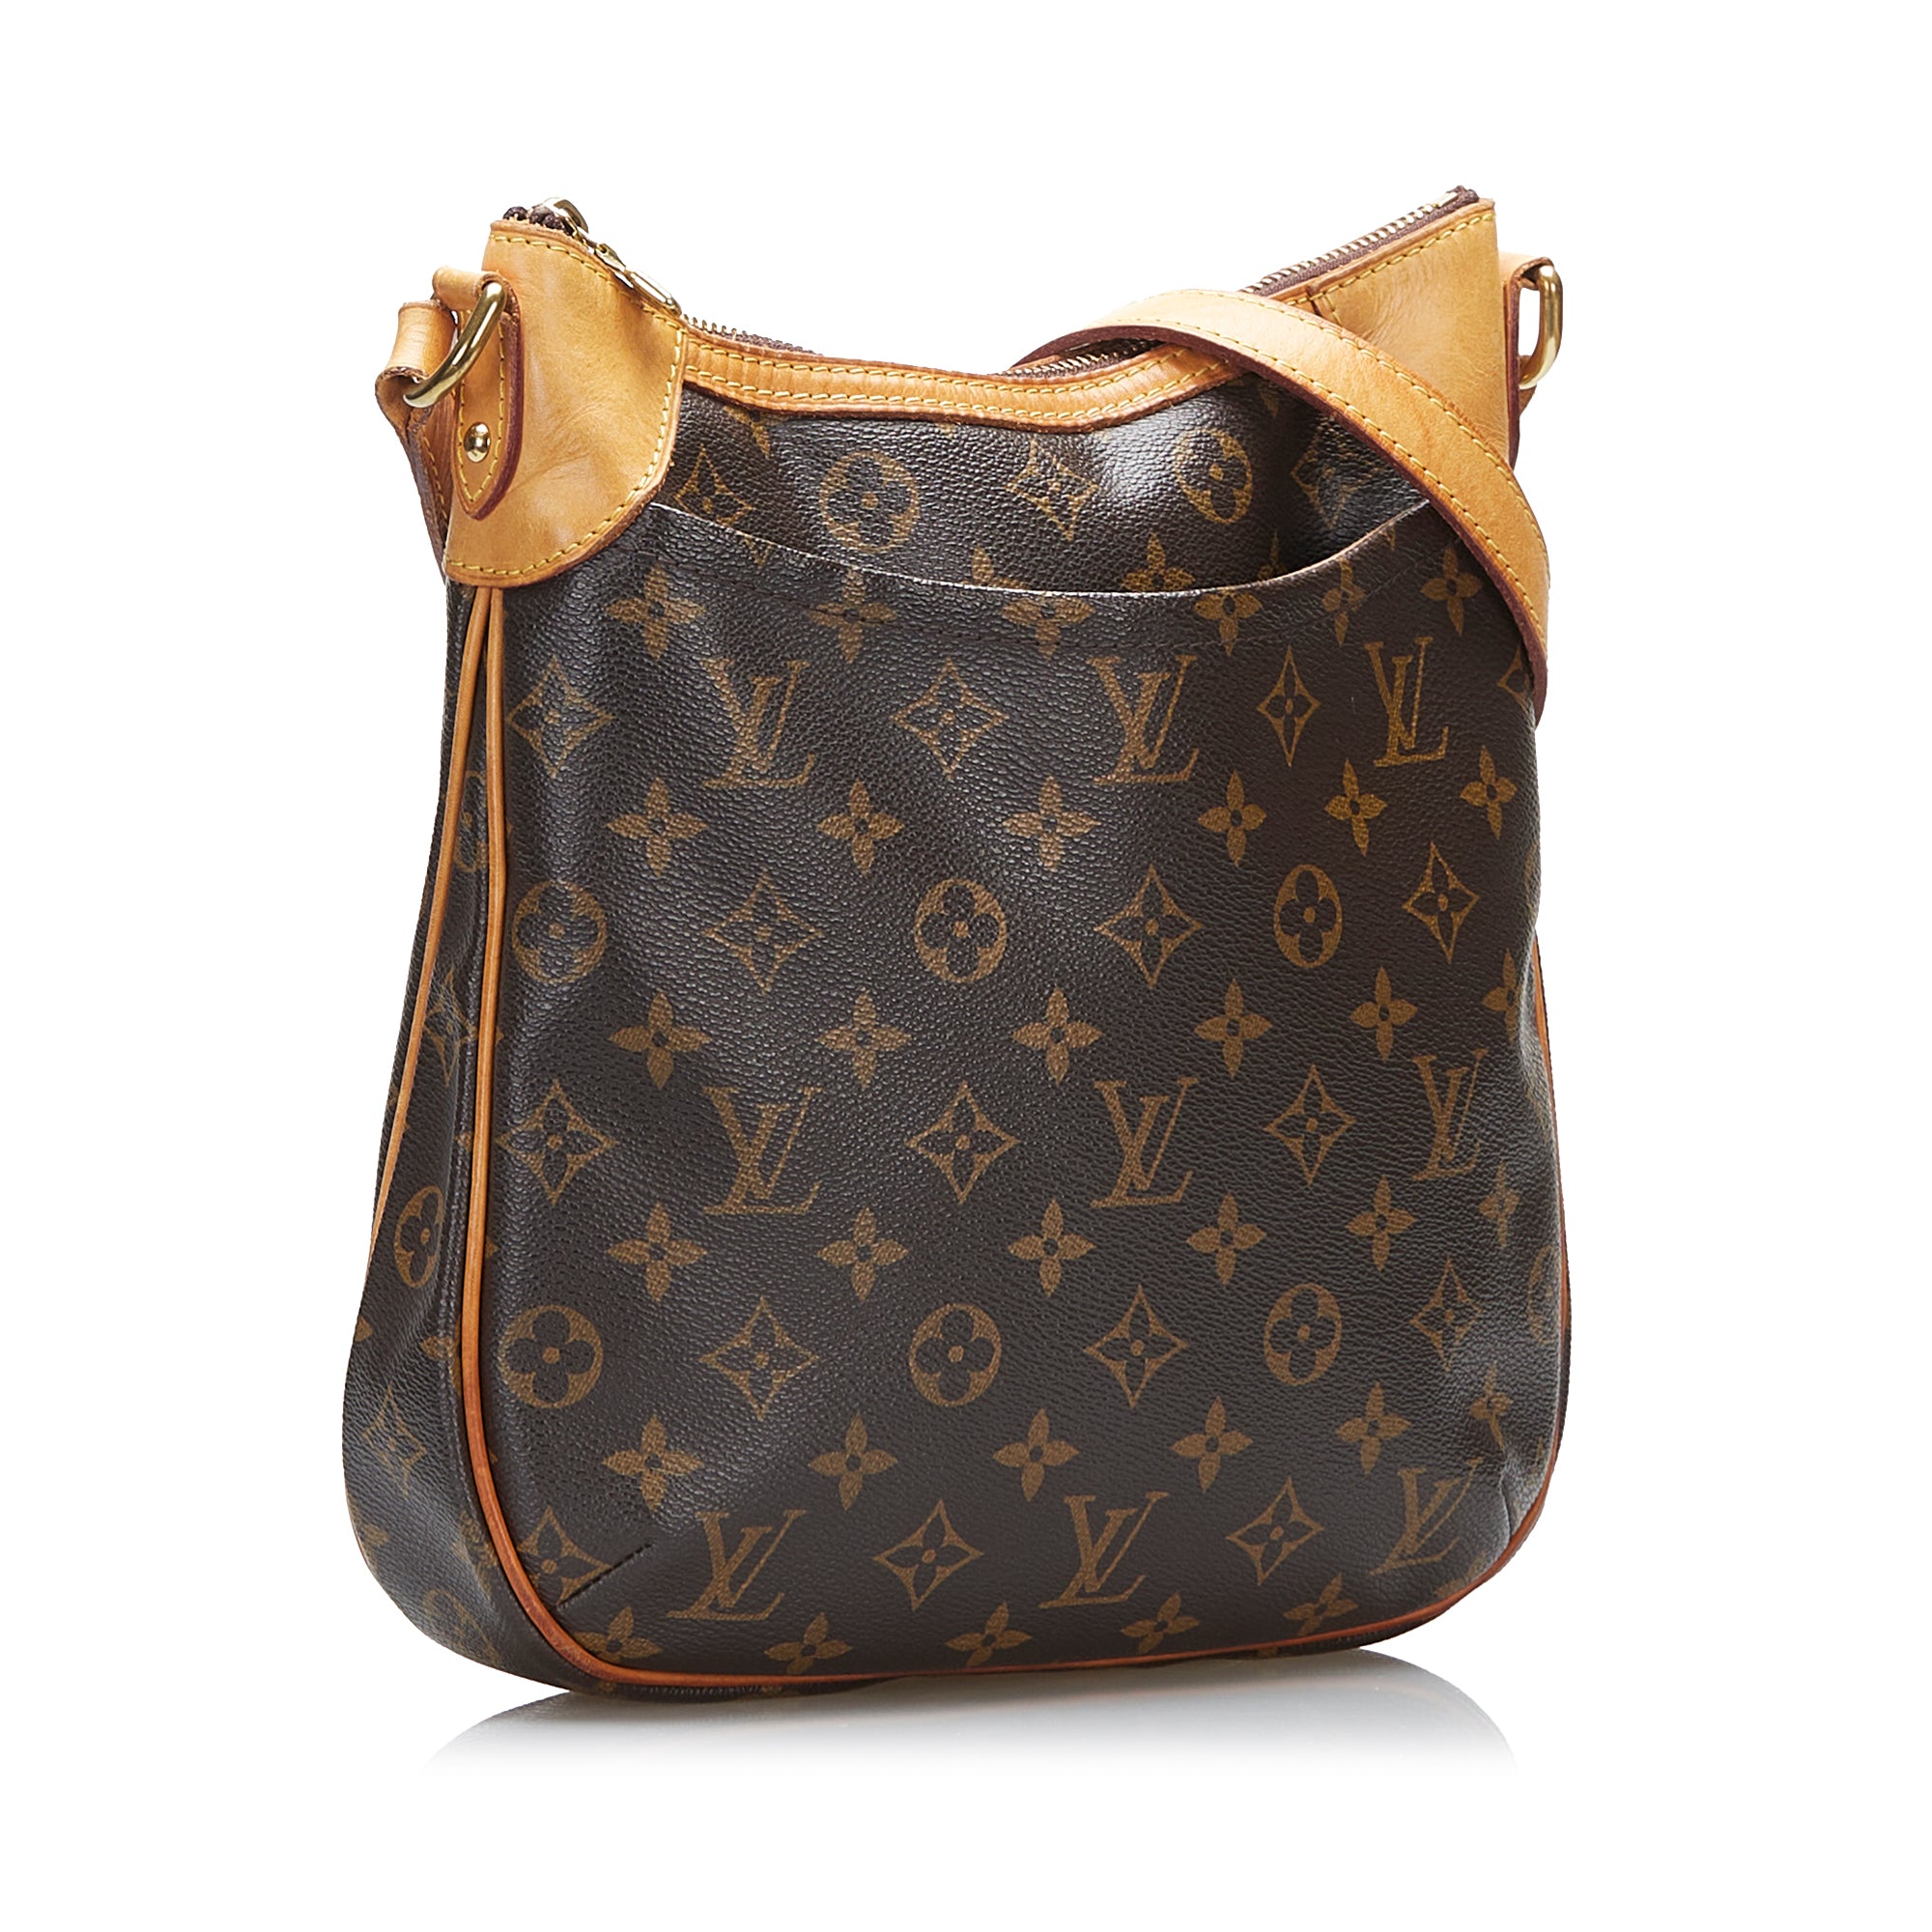 Louis Vuitton Odeon PM Monogram Canvas Shoulder Bag with Luggage